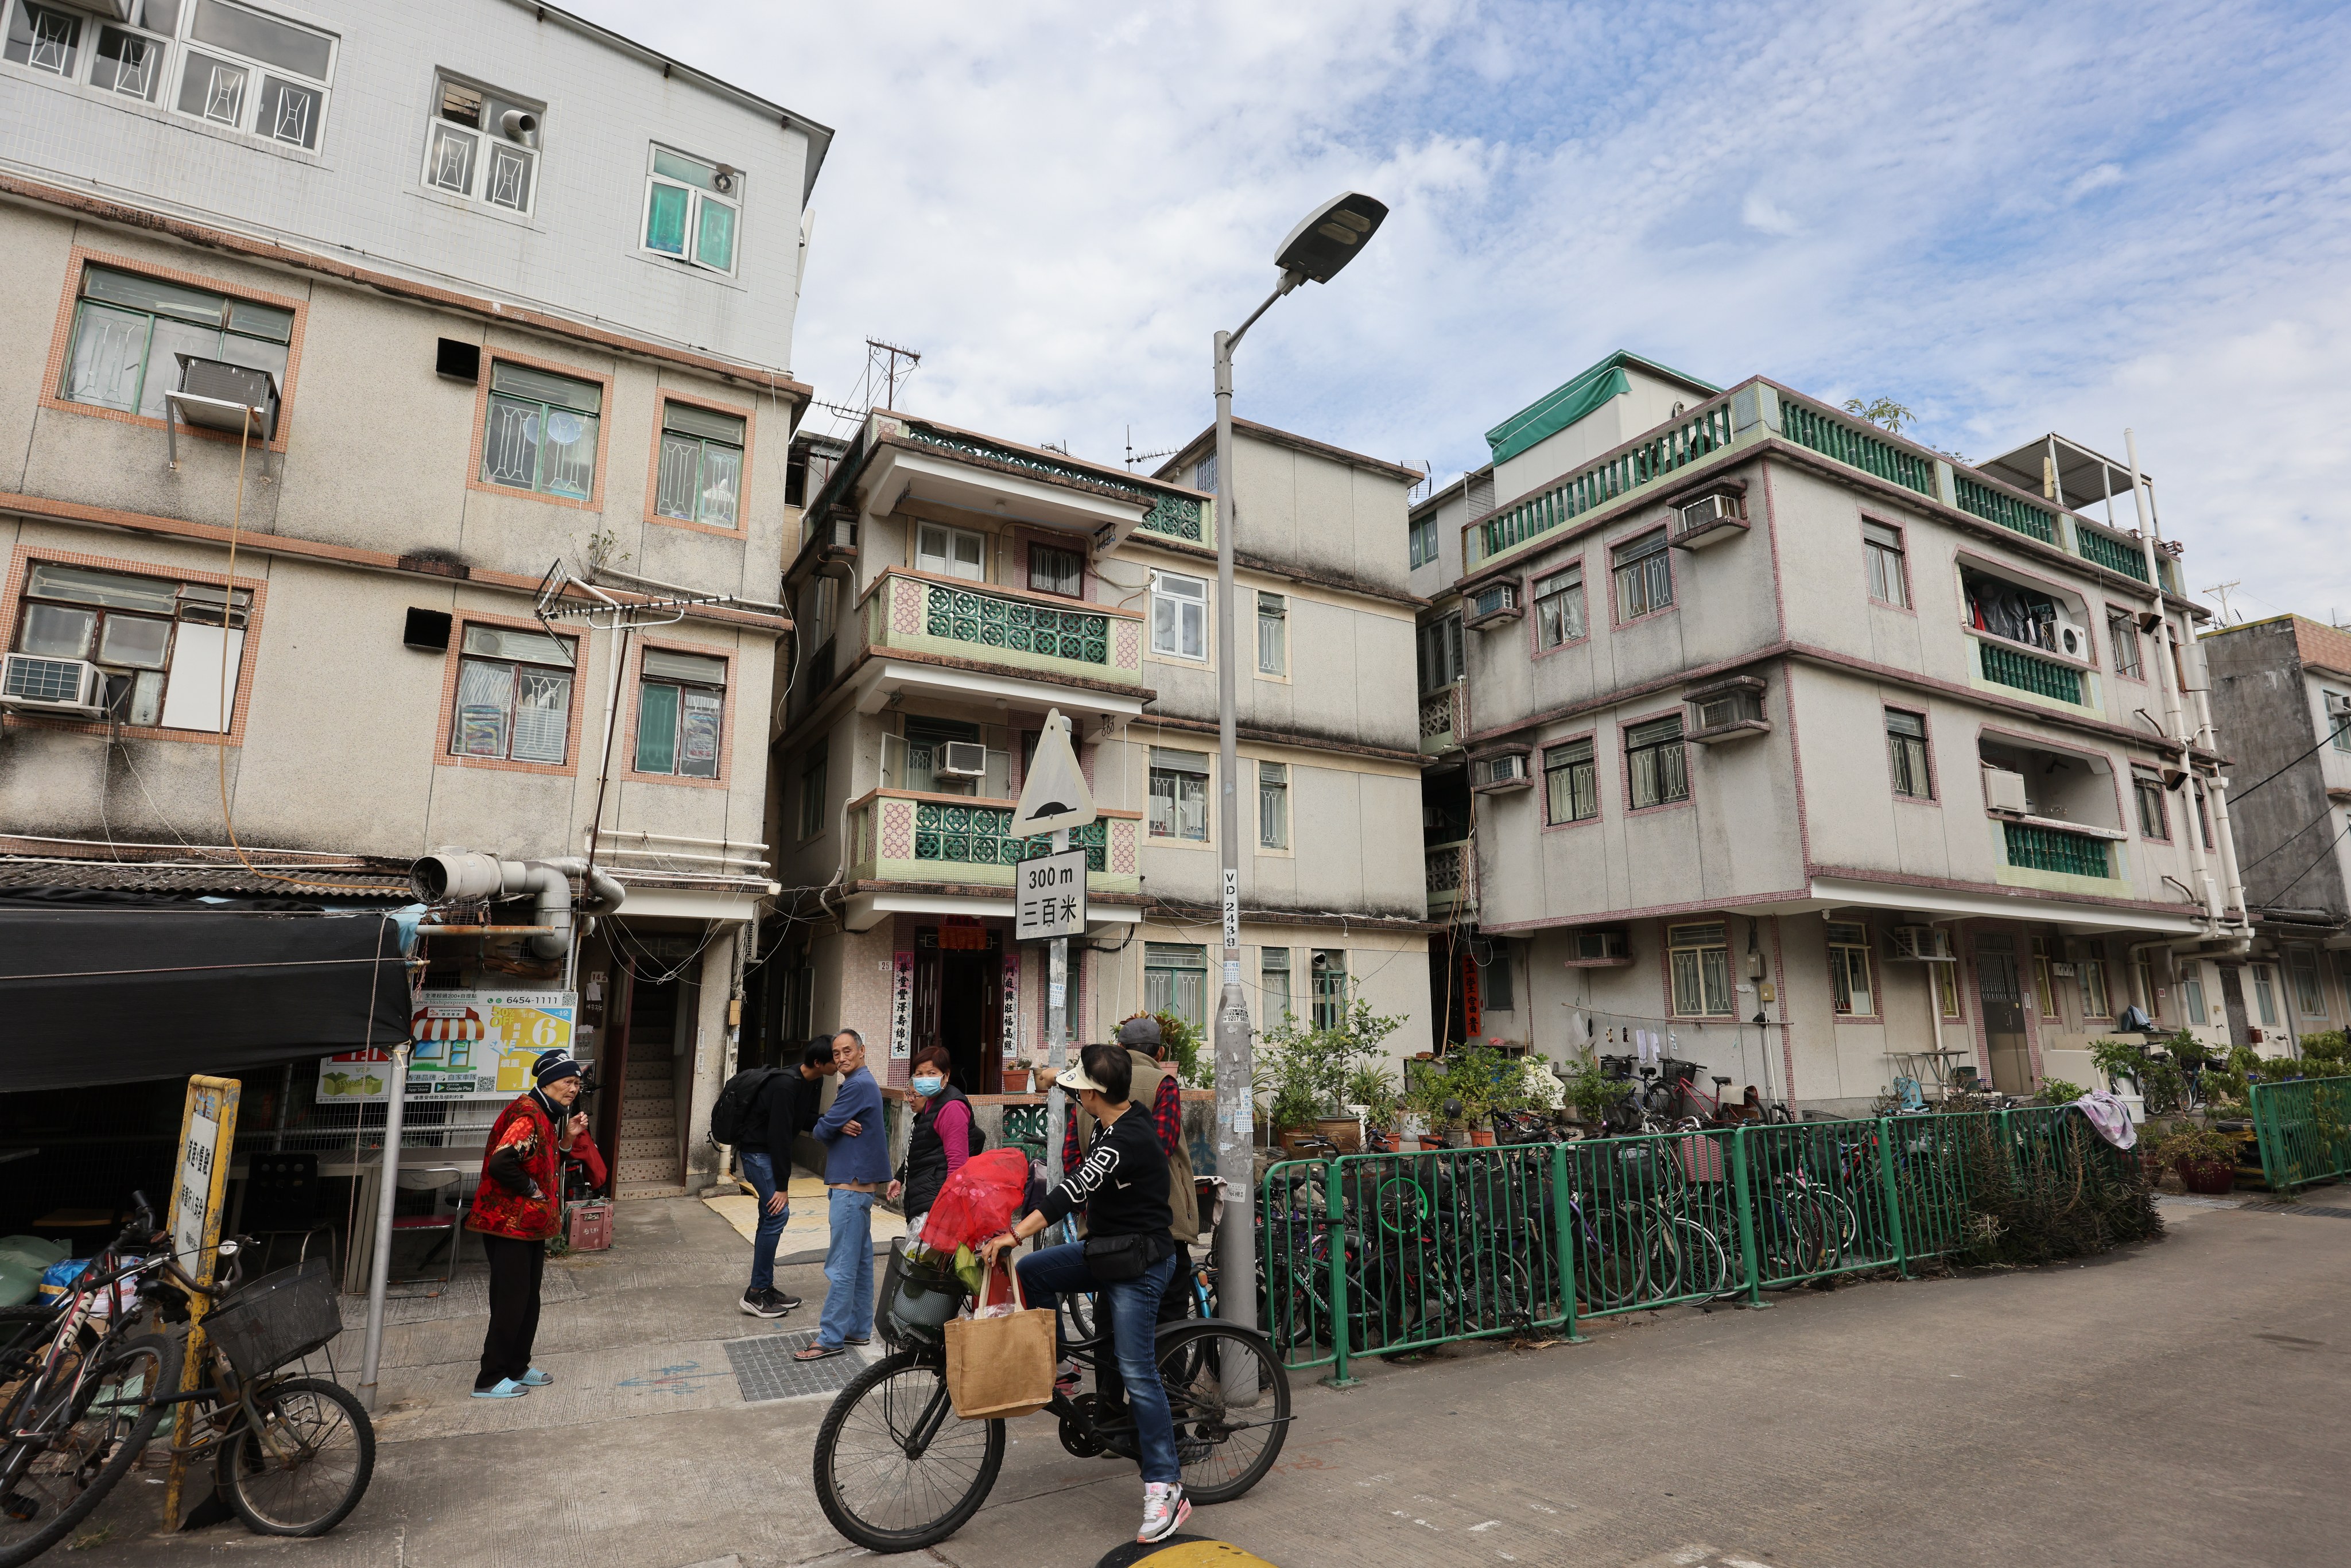 Fanling Wai village in Hong Kong’s New Territories. Police have arrested five suspects related to the death of a mainland Chinese student whose body was discovered in a Fanling village last December. Photo:Jelly Tse